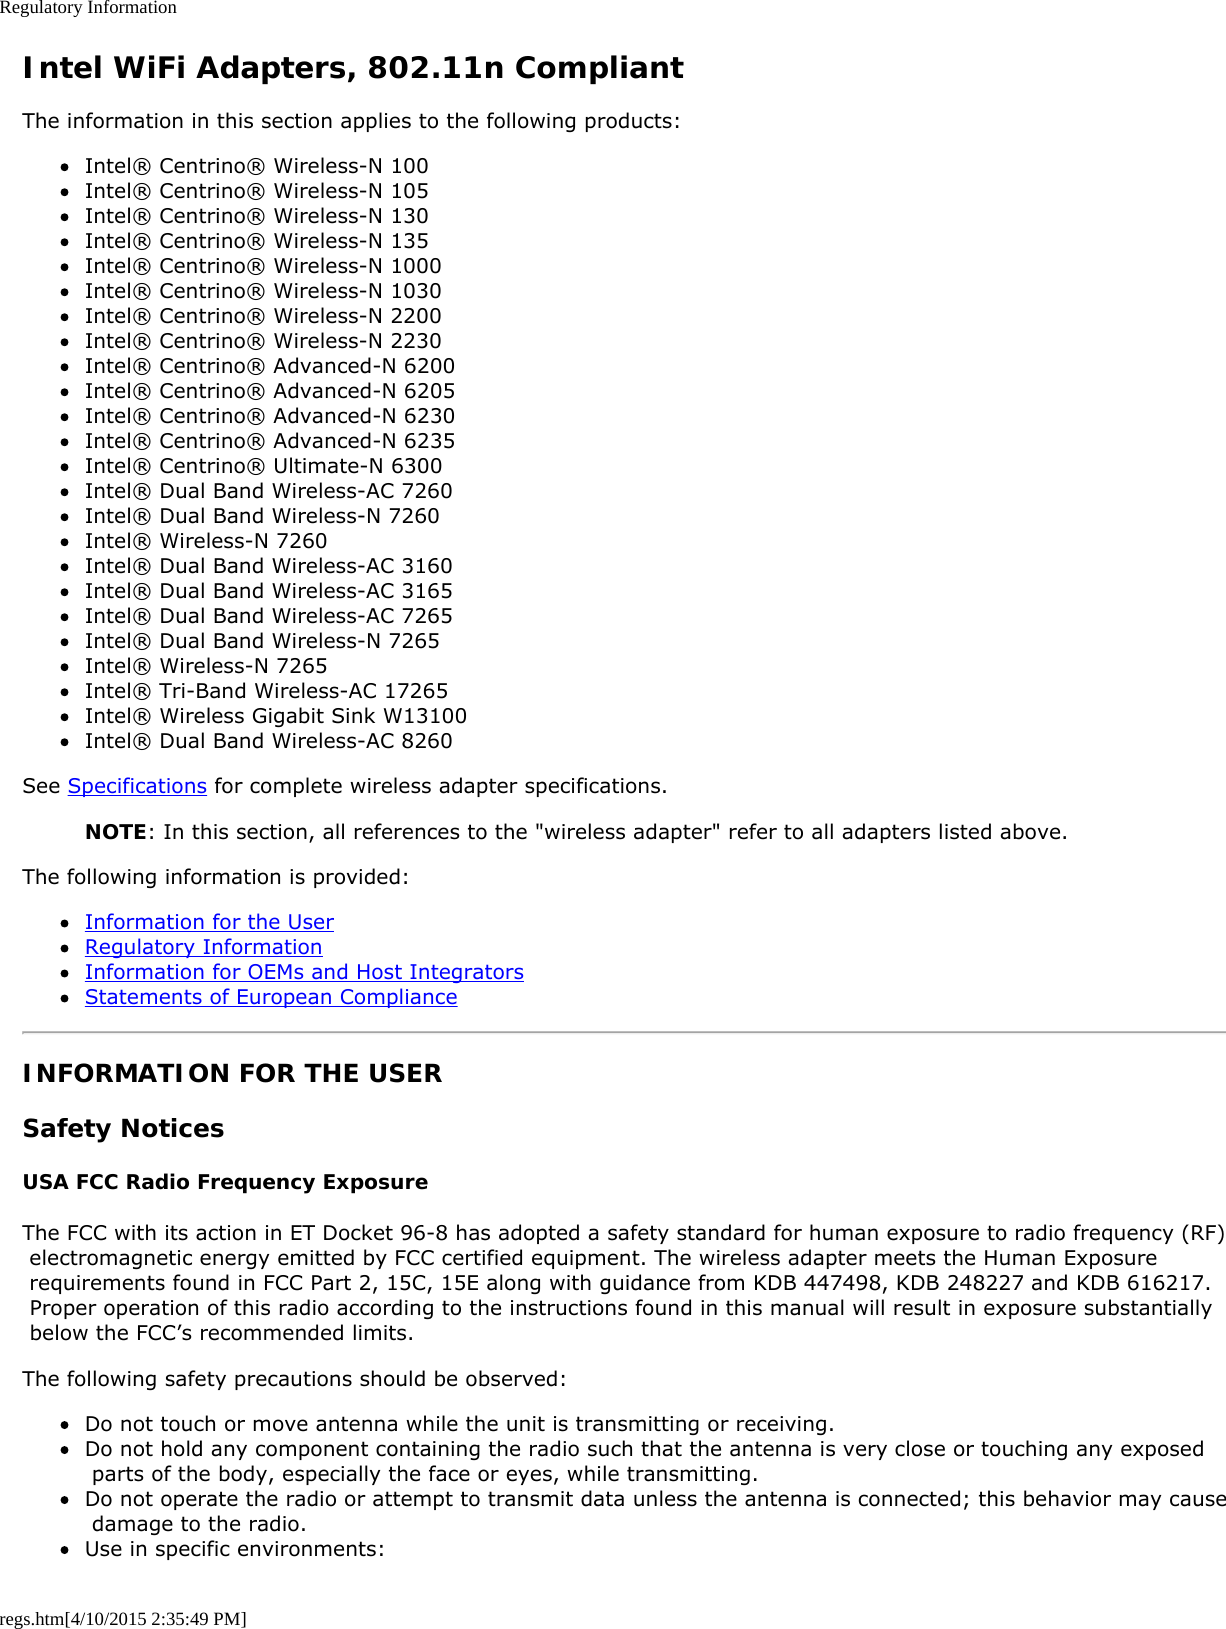 Regulatory Informationregs.htm[4/10/2015 2:35:49 PM]Intel WiFi Adapters, 802.11n CompliantThe information in this section applies to the following products:Intel® Centrino® Wireless-N 100Intel® Centrino® Wireless-N 105Intel® Centrino® Wireless-N 130Intel® Centrino® Wireless-N 135Intel® Centrino® Wireless-N 1000Intel® Centrino® Wireless-N 1030Intel® Centrino® Wireless-N 2200Intel® Centrino® Wireless-N 2230Intel® Centrino® Advanced-N 6200Intel® Centrino® Advanced-N 6205Intel® Centrino® Advanced-N 6230Intel® Centrino® Advanced-N 6235Intel® Centrino® Ultimate-N 6300Intel® Dual Band Wireless-AC 7260Intel® Dual Band Wireless-N 7260Intel® Wireless-N 7260Intel® Dual Band Wireless-AC 3160Intel® Dual Band Wireless-AC 3165Intel® Dual Band Wireless-AC 7265Intel® Dual Band Wireless-N 7265Intel® Wireless-N 7265Intel® Tri-Band Wireless-AC 17265Intel® Wireless Gigabit Sink W13100Intel® Dual Band Wireless-AC 8260See Specifications for complete wireless adapter specifications.NOTE: In this section, all references to the &quot;wireless adapter&quot; refer to all adapters listed above.The following information is provided:Information for the UserRegulatory InformationInformation for OEMs and Host IntegratorsStatements of European ComplianceINFORMATION FOR THE USERSafety NoticesUSA FCC Radio Frequency ExposureThe FCC with its action in ET Docket 96-8 has adopted a safety standard for human exposure to radio frequency (RF) electromagnetic energy emitted by FCC certified equipment. The wireless adapter meets the Human Exposure requirements found in FCC Part 2, 15C, 15E along with guidance from KDB 447498, KDB 248227 and KDB 616217. Proper operation of this radio according to the instructions found in this manual will result in exposure substantially below the FCC’s recommended limits.The following safety precautions should be observed:Do not touch or move antenna while the unit is transmitting or receiving.Do not hold any component containing the radio such that the antenna is very close or touching any exposed parts of the body, especially the face or eyes, while transmitting.Do not operate the radio or attempt to transmit data unless the antenna is connected; this behavior may cause damage to the radio.Use in specific environments: